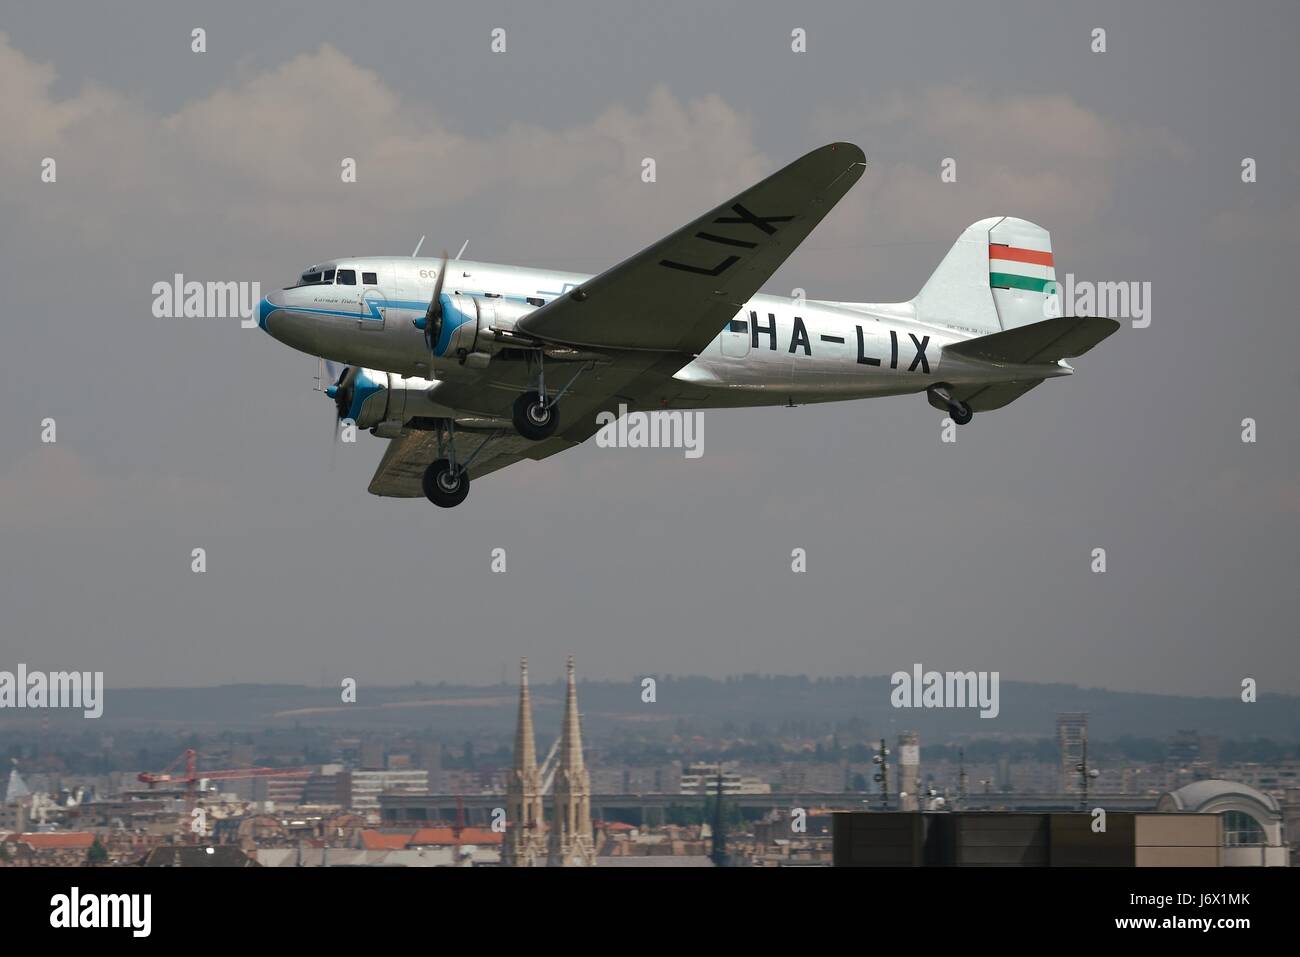 BUDAPEST, HUNGARY - MAY 1, 2014: Li-2 aircraft flying over Budapest. This aircraft is 65 years old, Soviet version of the legendary DC-3 Stock Photo